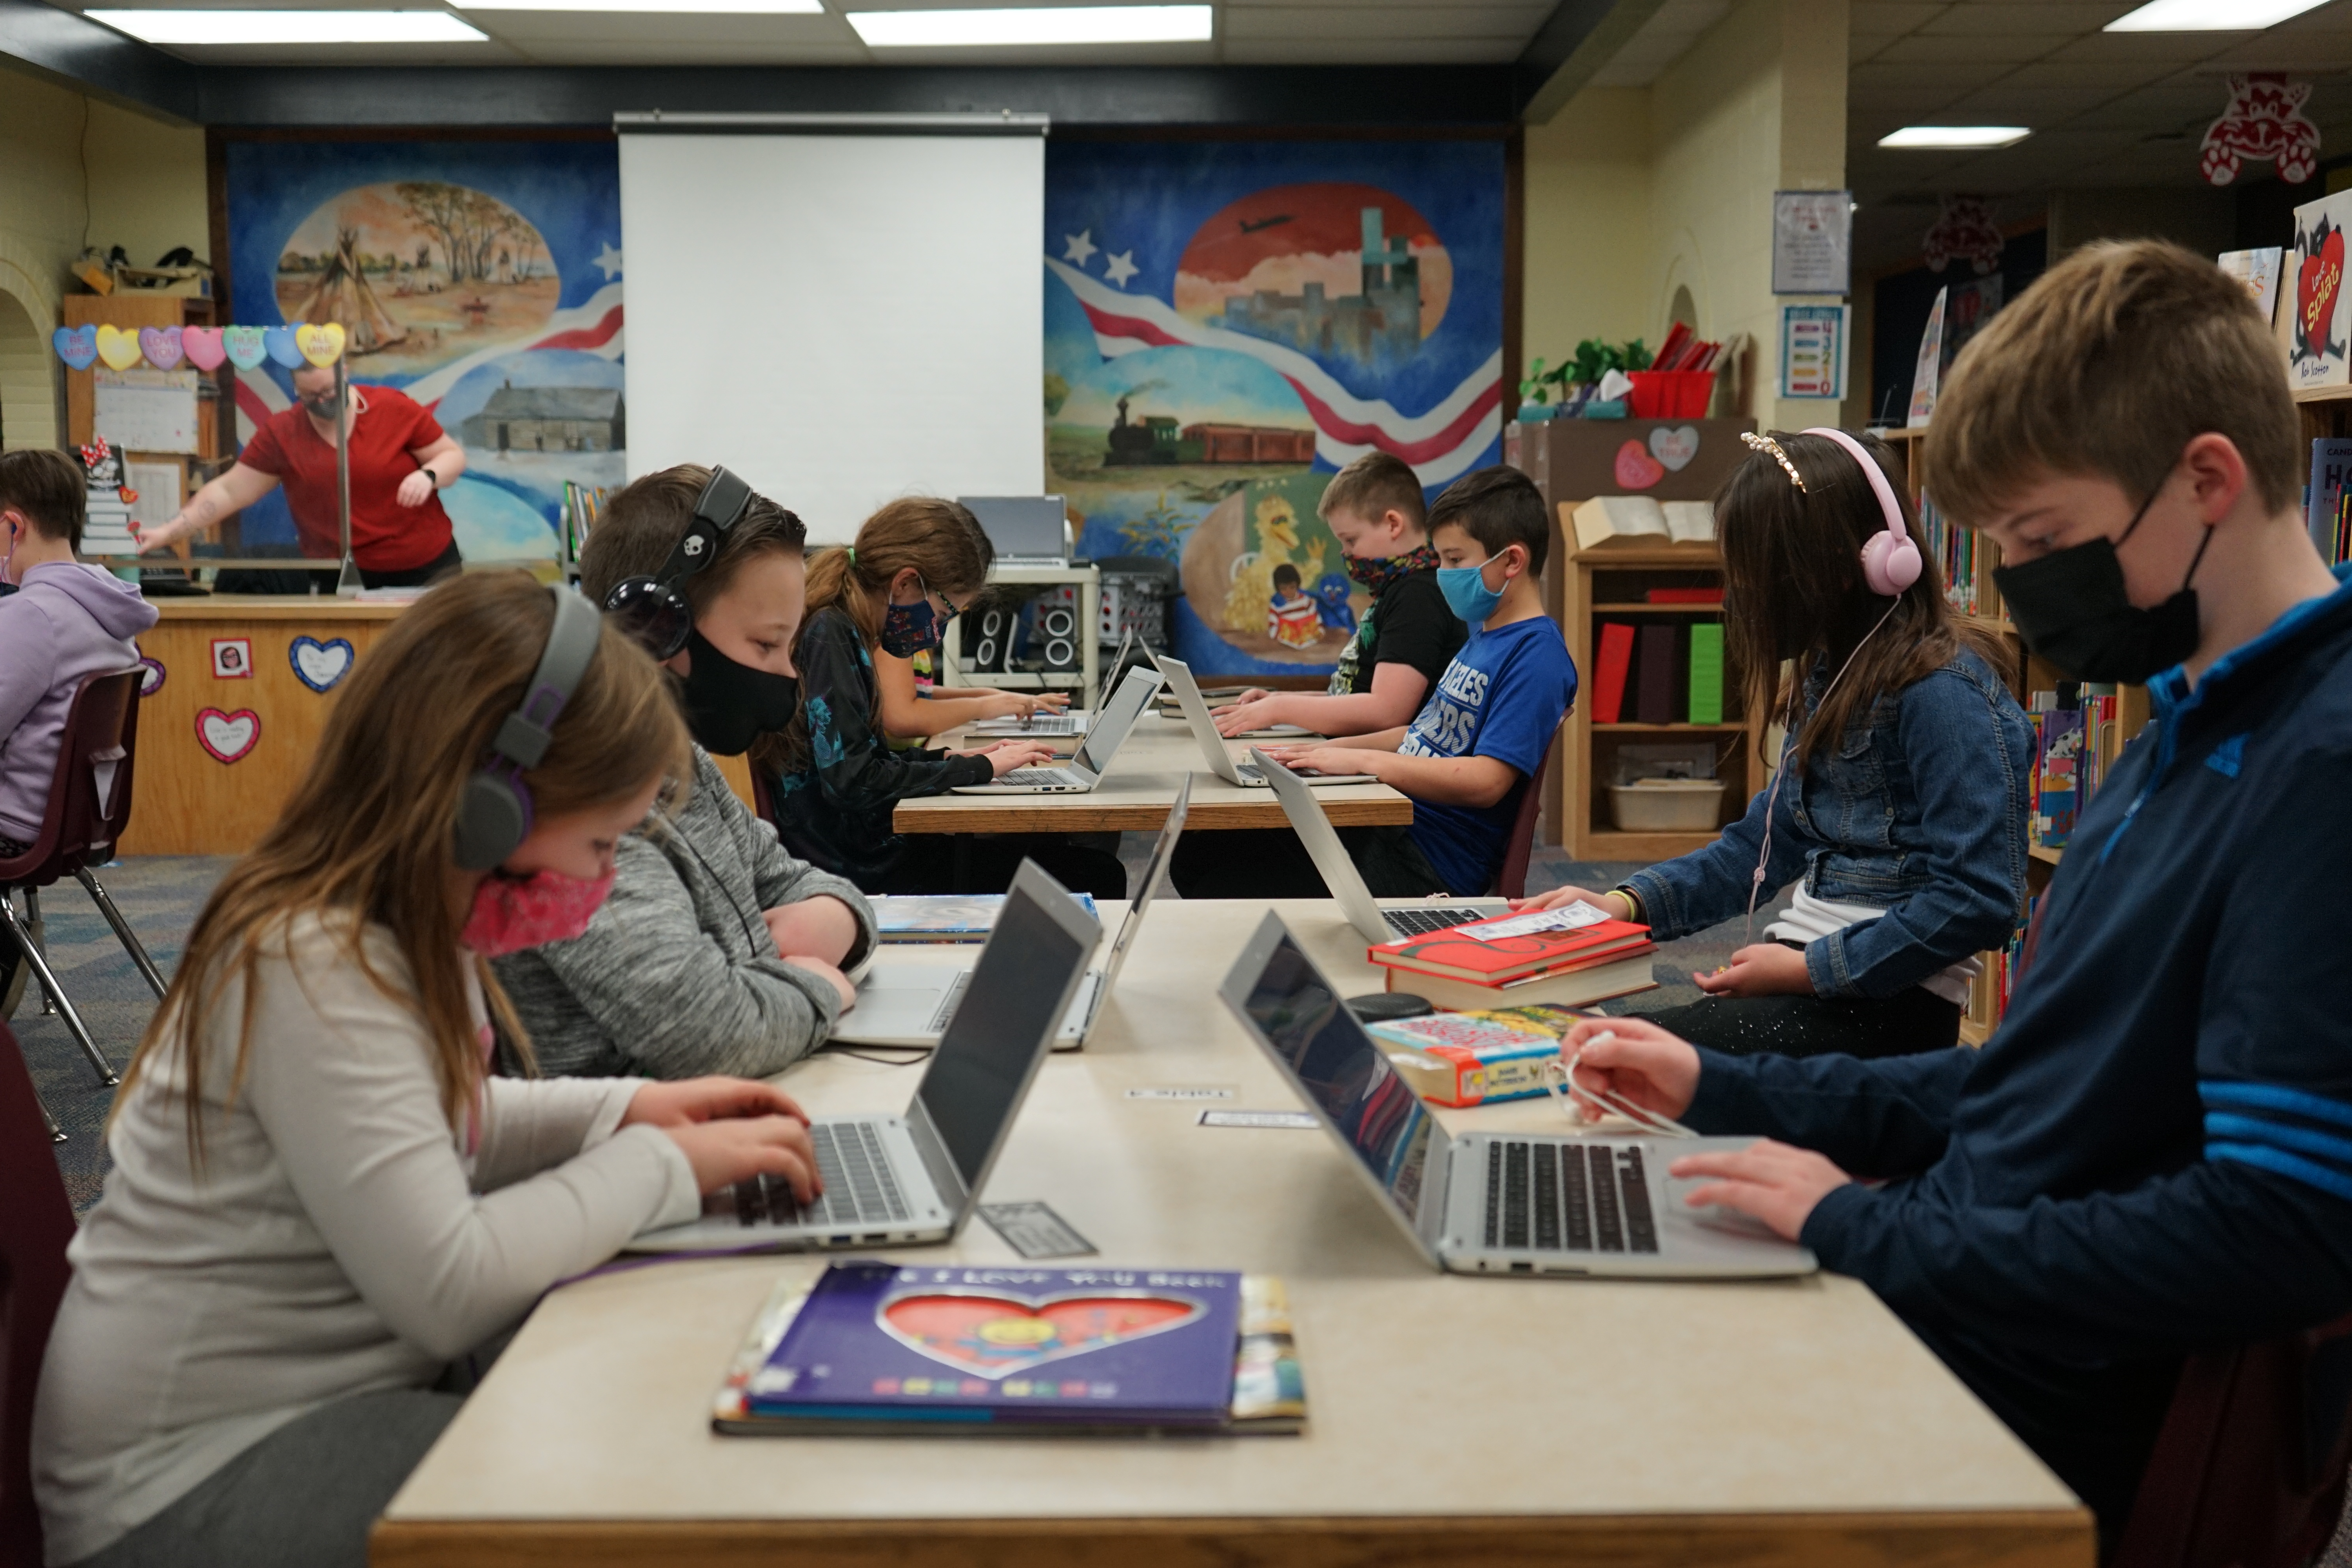 Washington Elementary Students On Computers In The Library